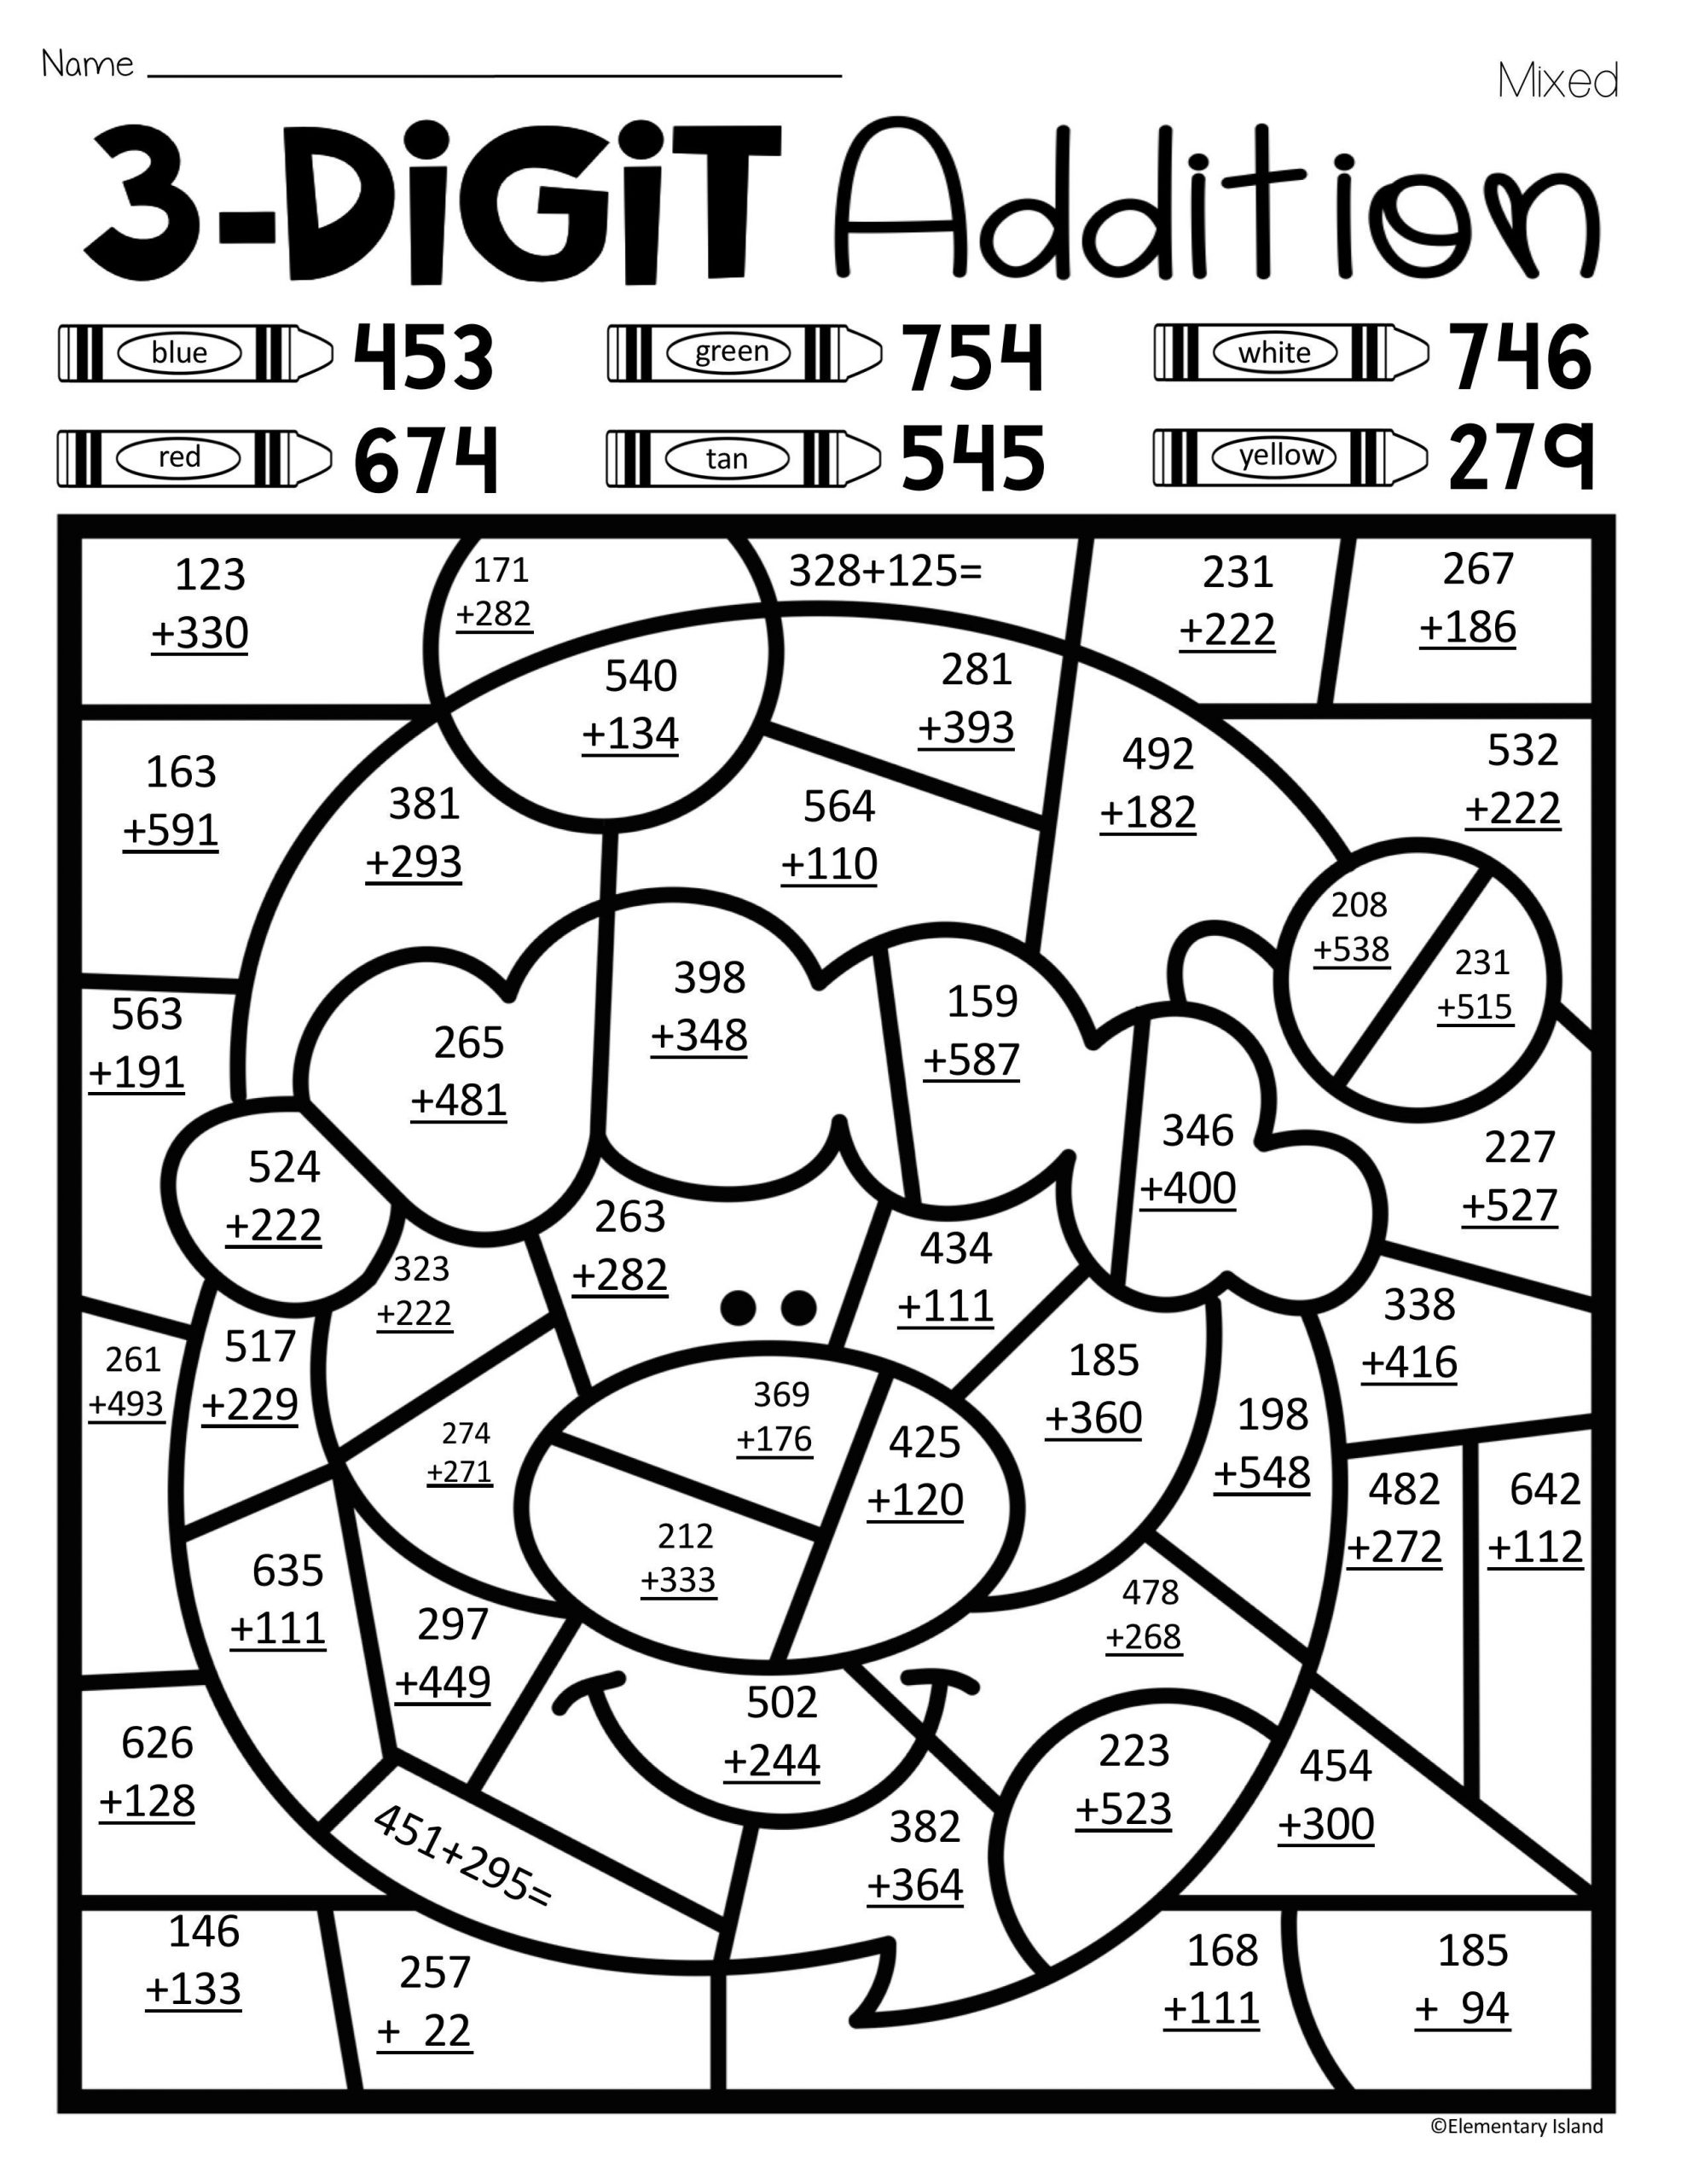 Worksheets : Coloring Book Valentines Math Worksheets 4Th